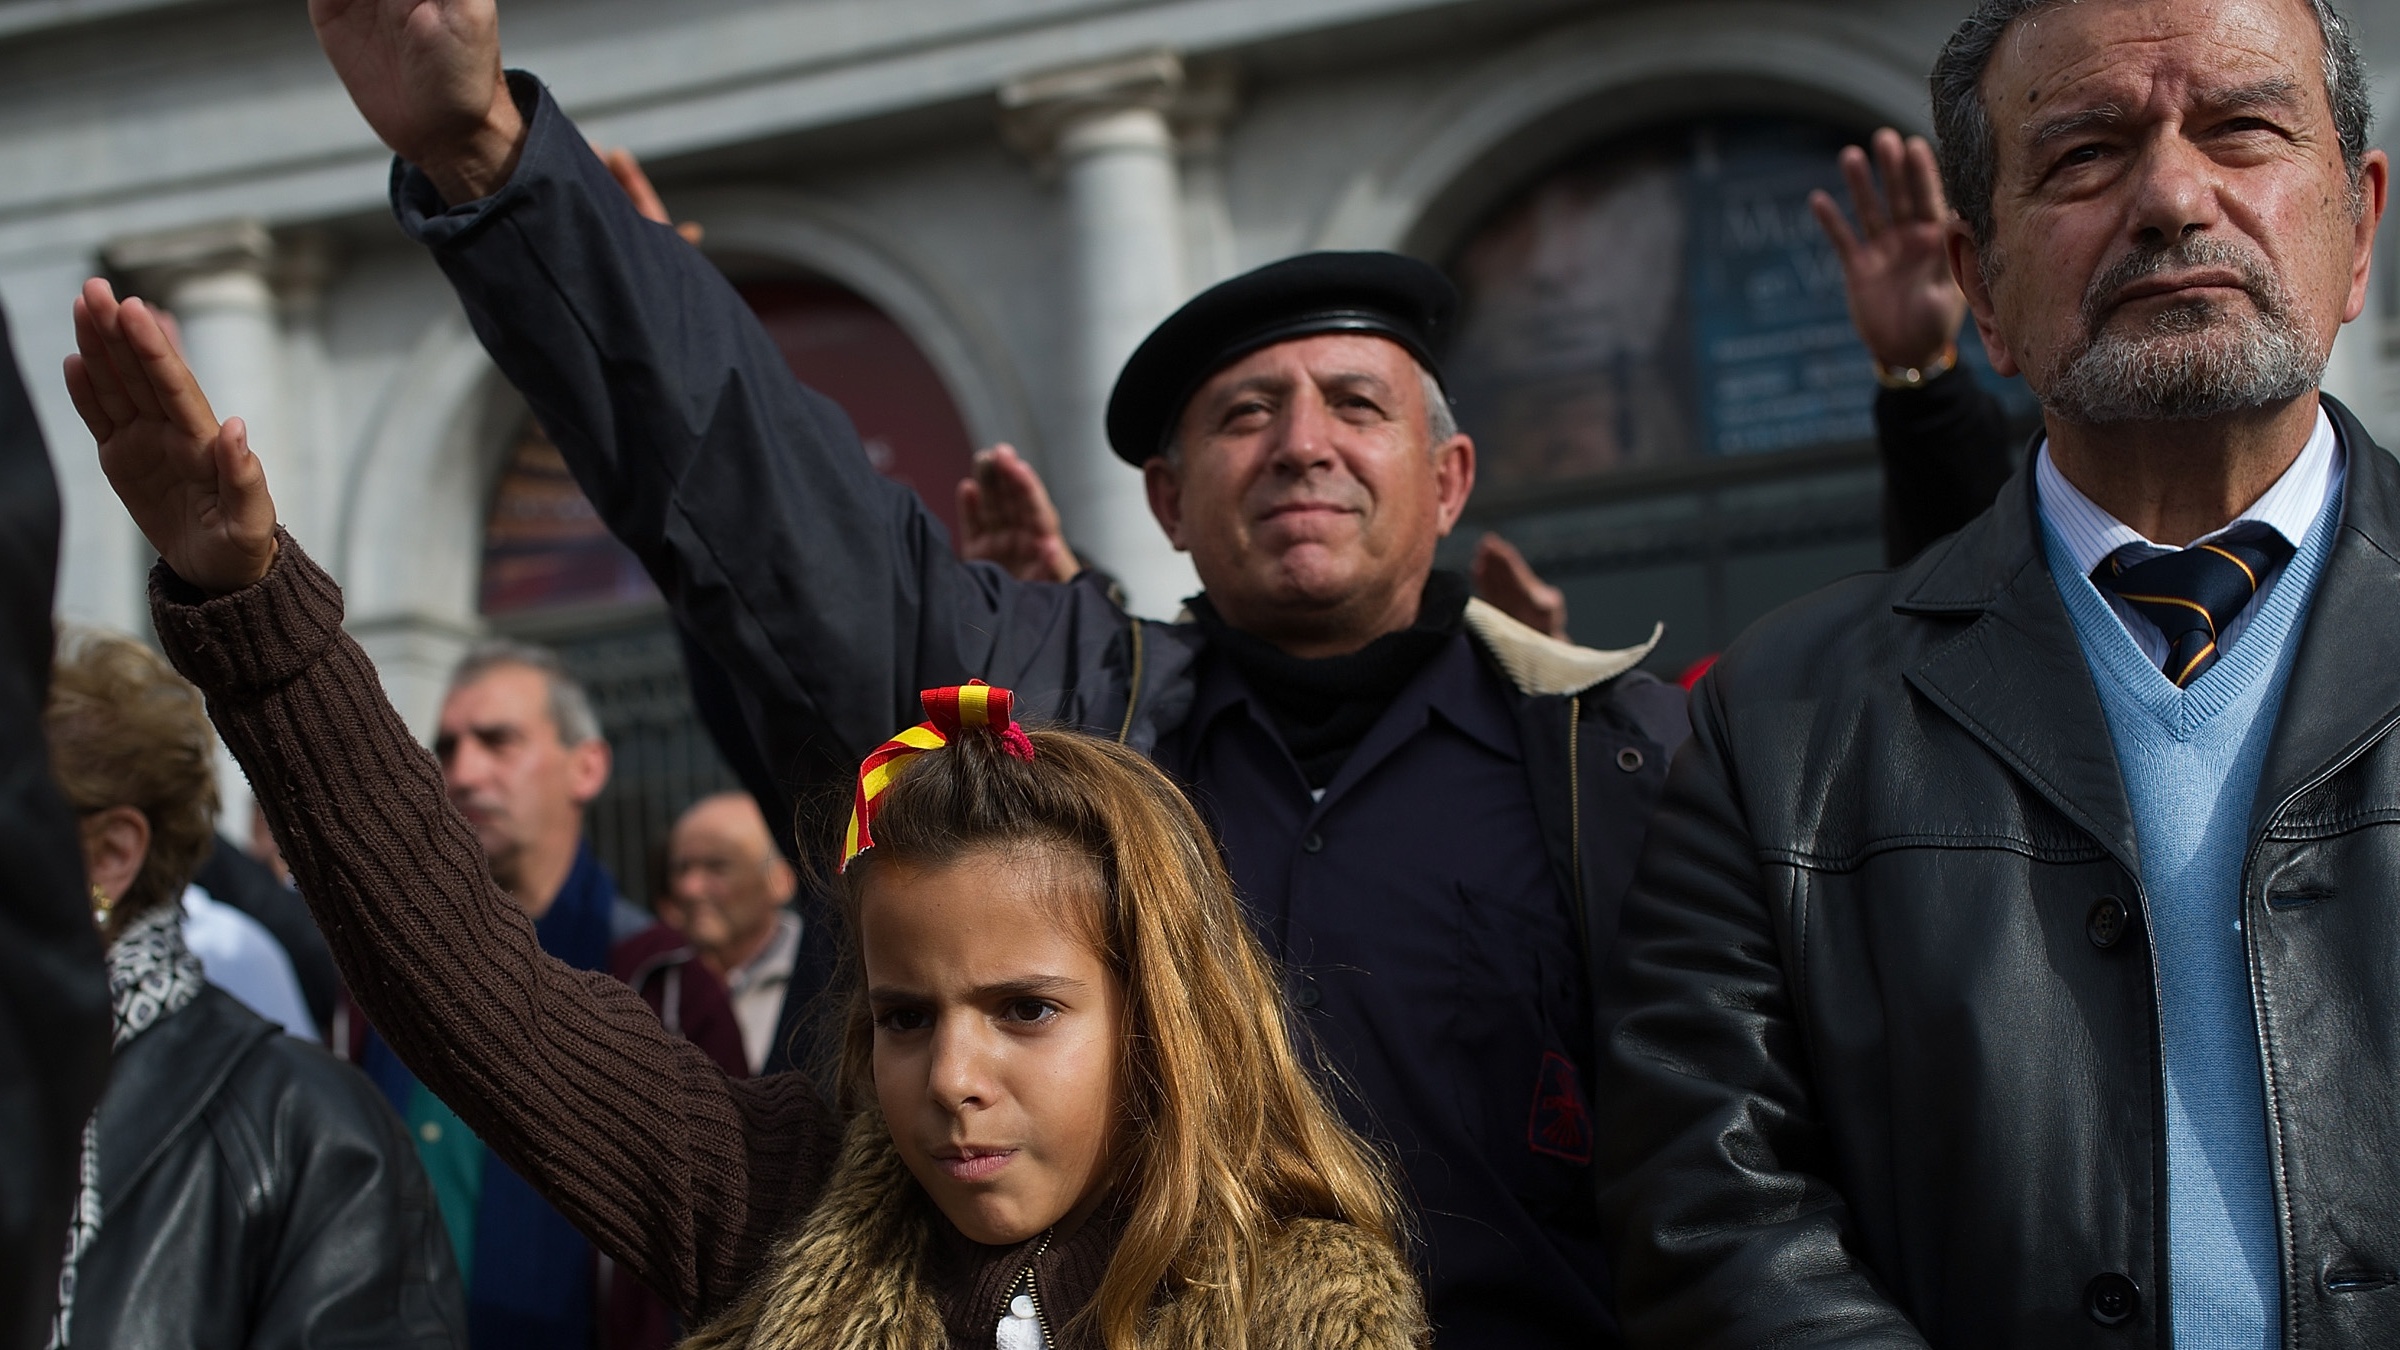 Girl performs fascist salute during rally marking anniversary of Francisco Franco’s death